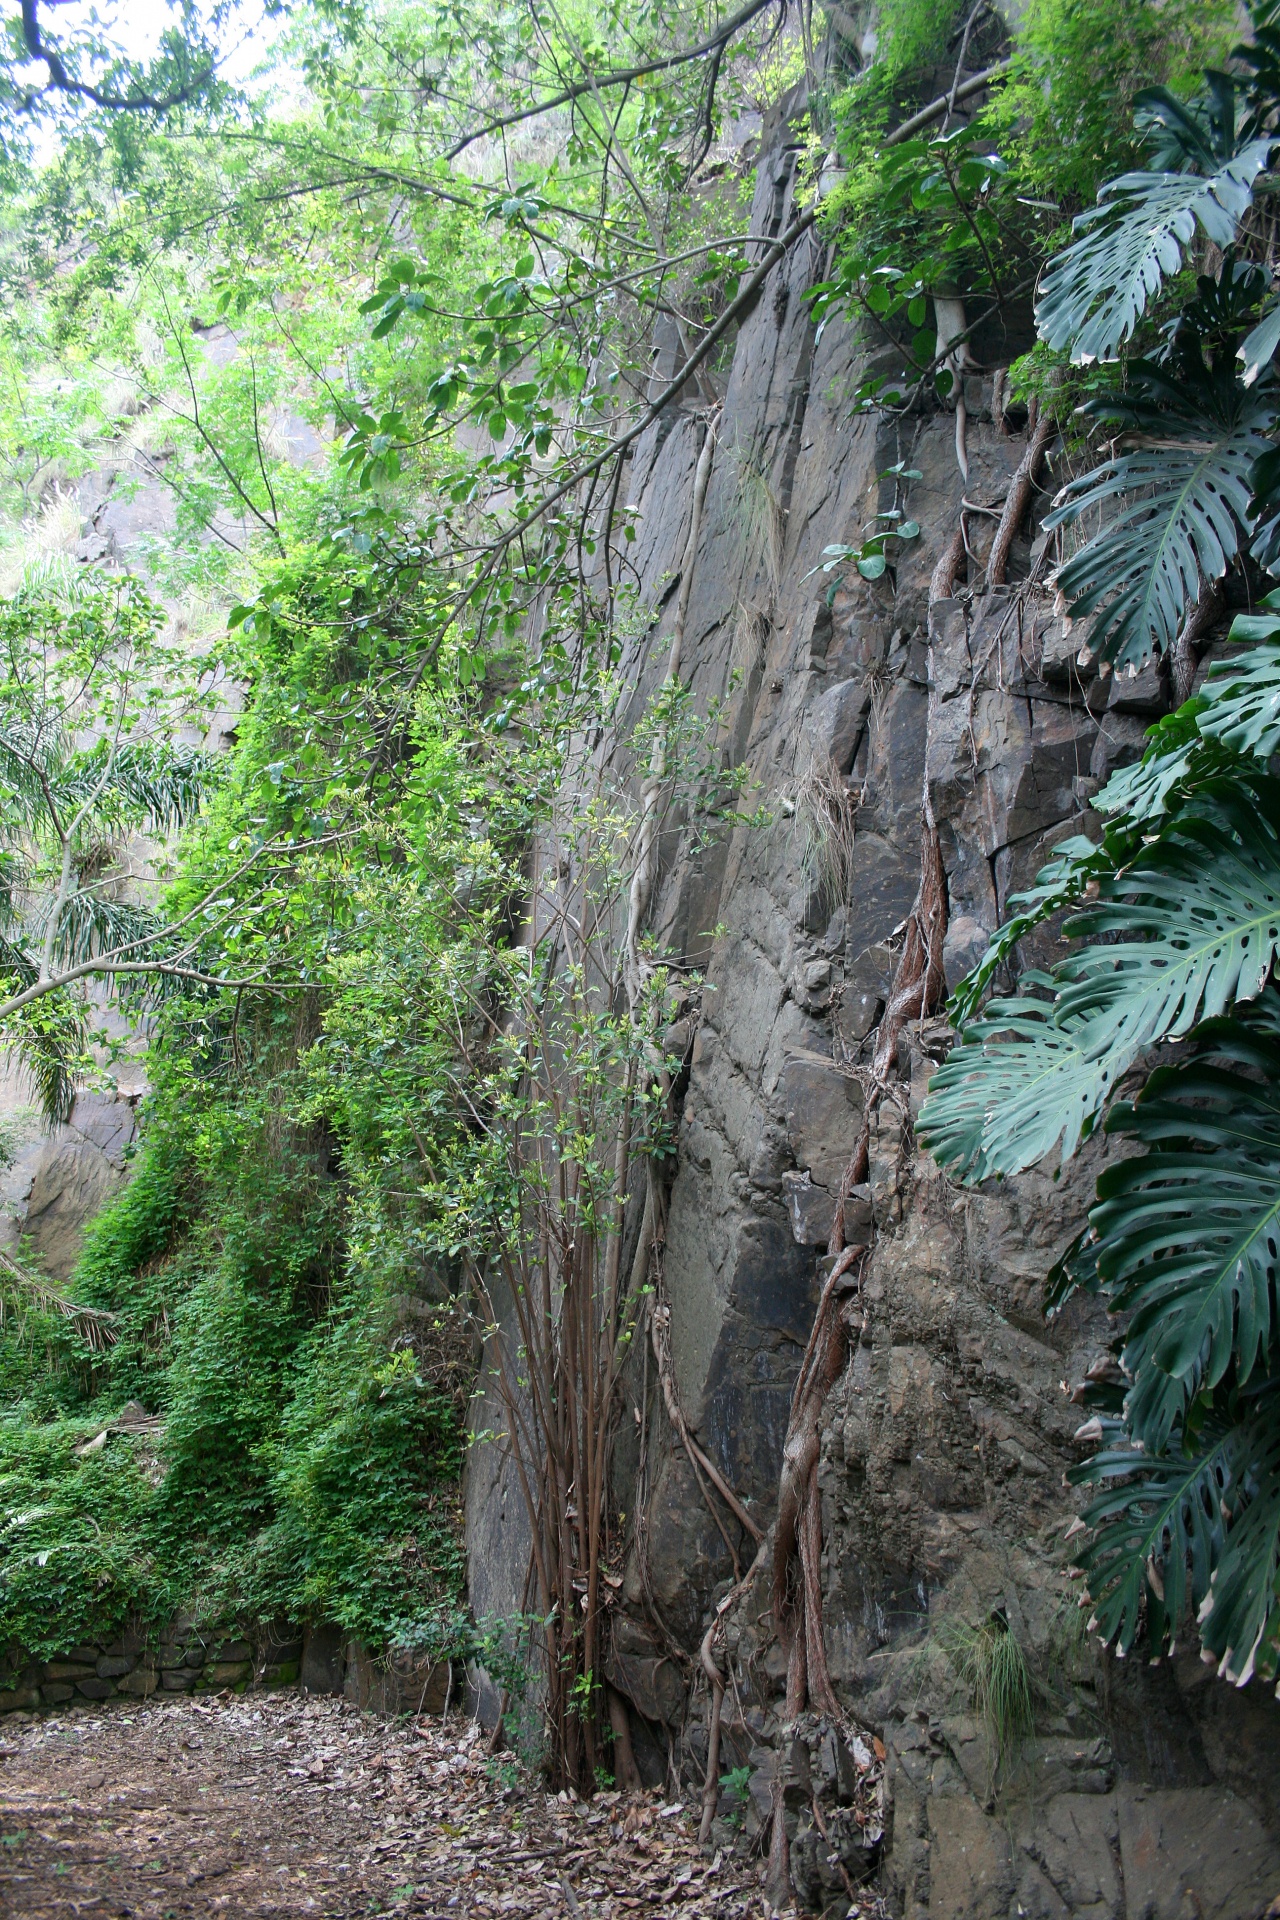 Sheer Cliff And Thick Vegetation